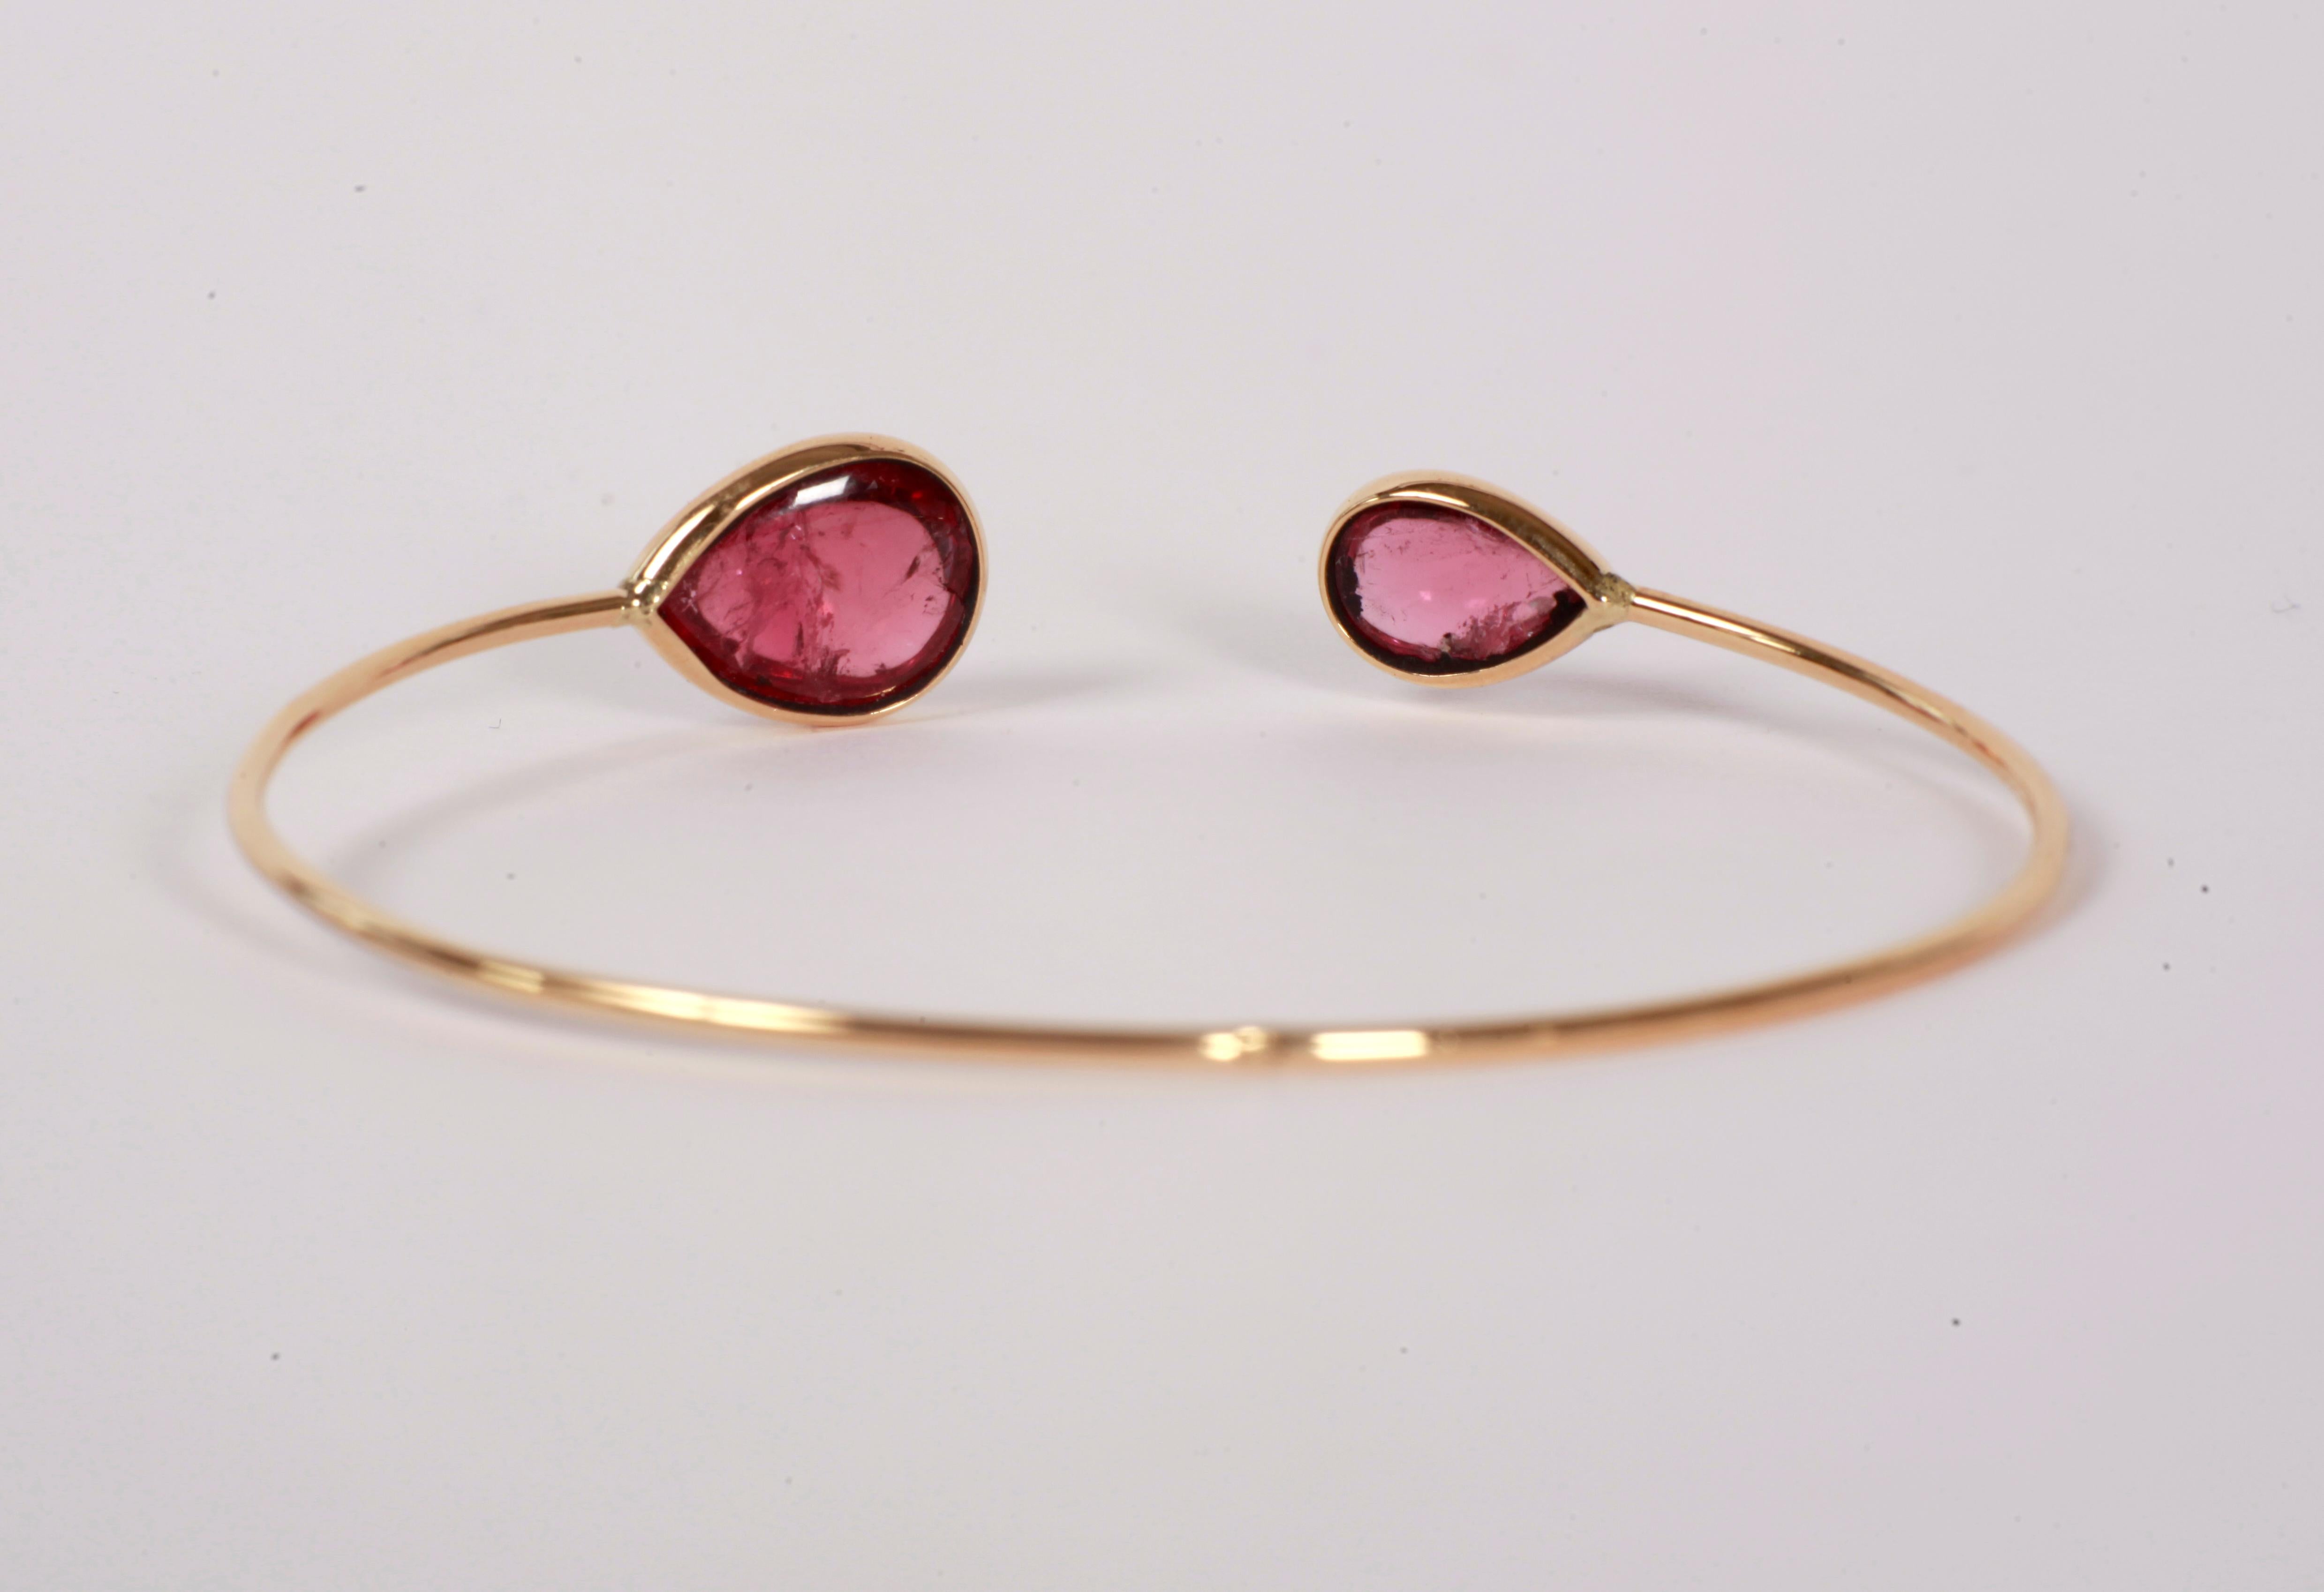 Contemporary Pink Tourmaline Yellow Gold Bangle Bracelet Created by Marion Jeantet